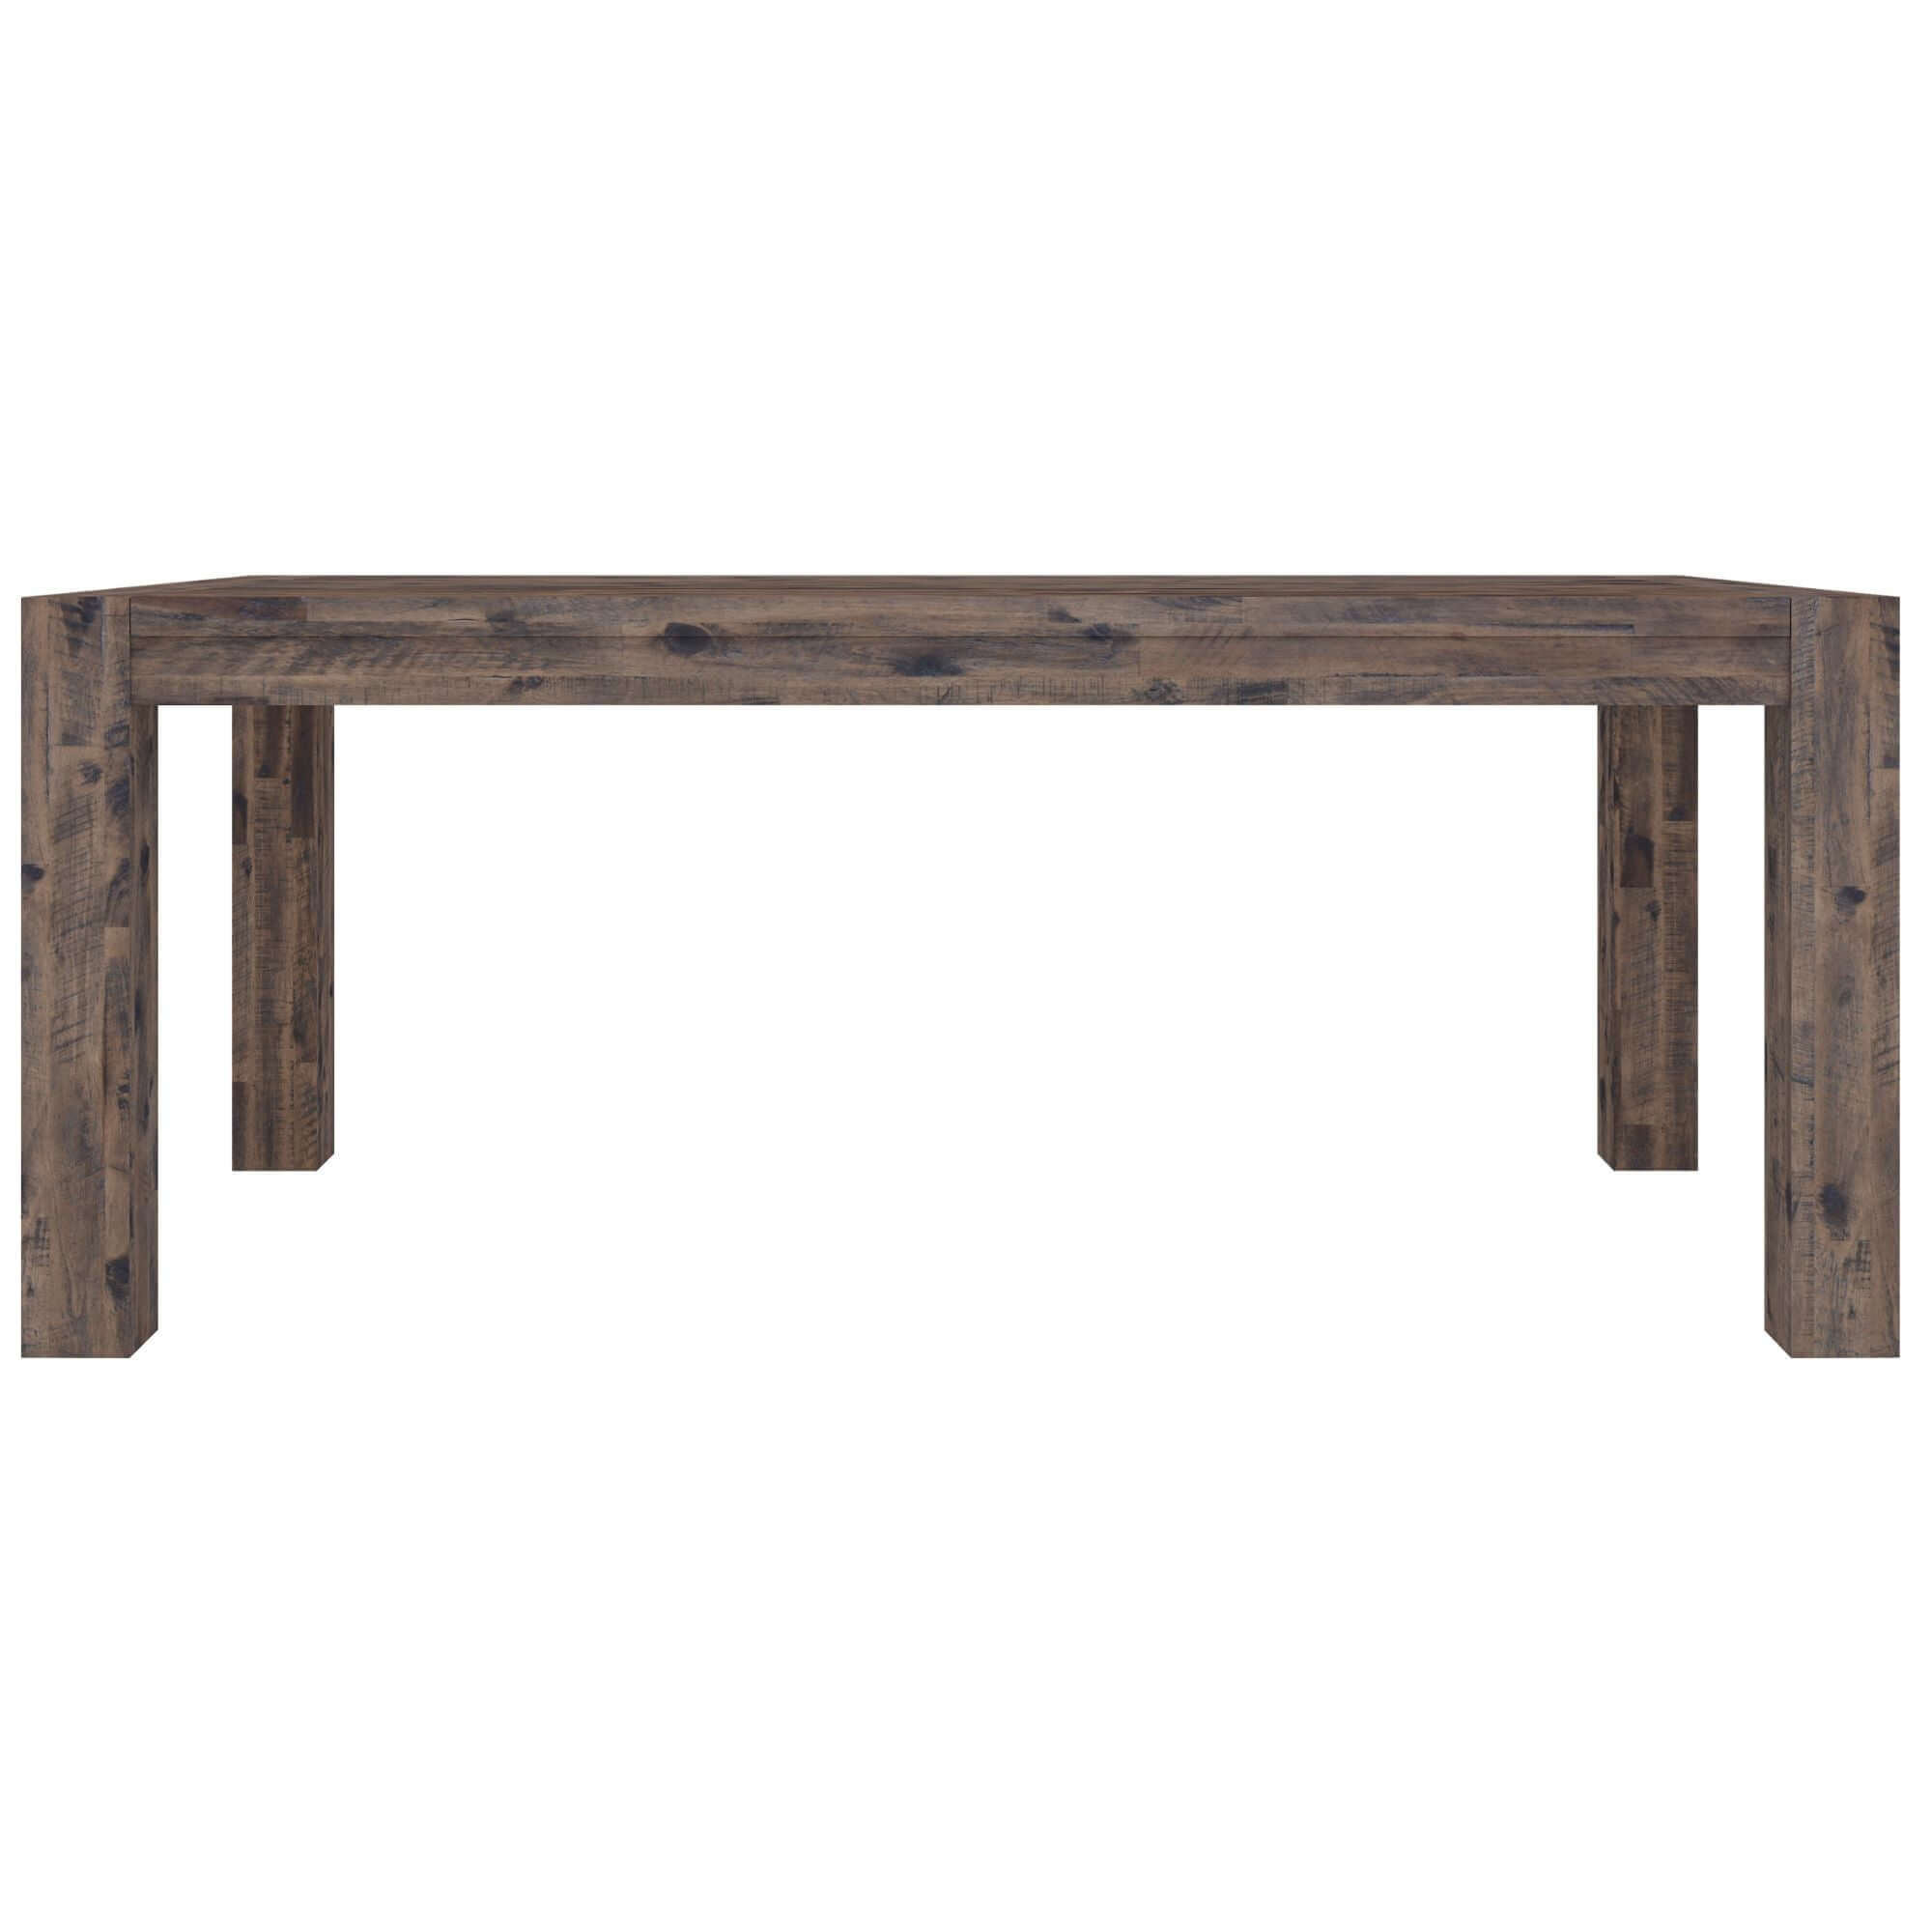 Catmint Dining Table 210cm 8 Seater Solid Acacia Timber Wood - Stone Grey-Upinteriors